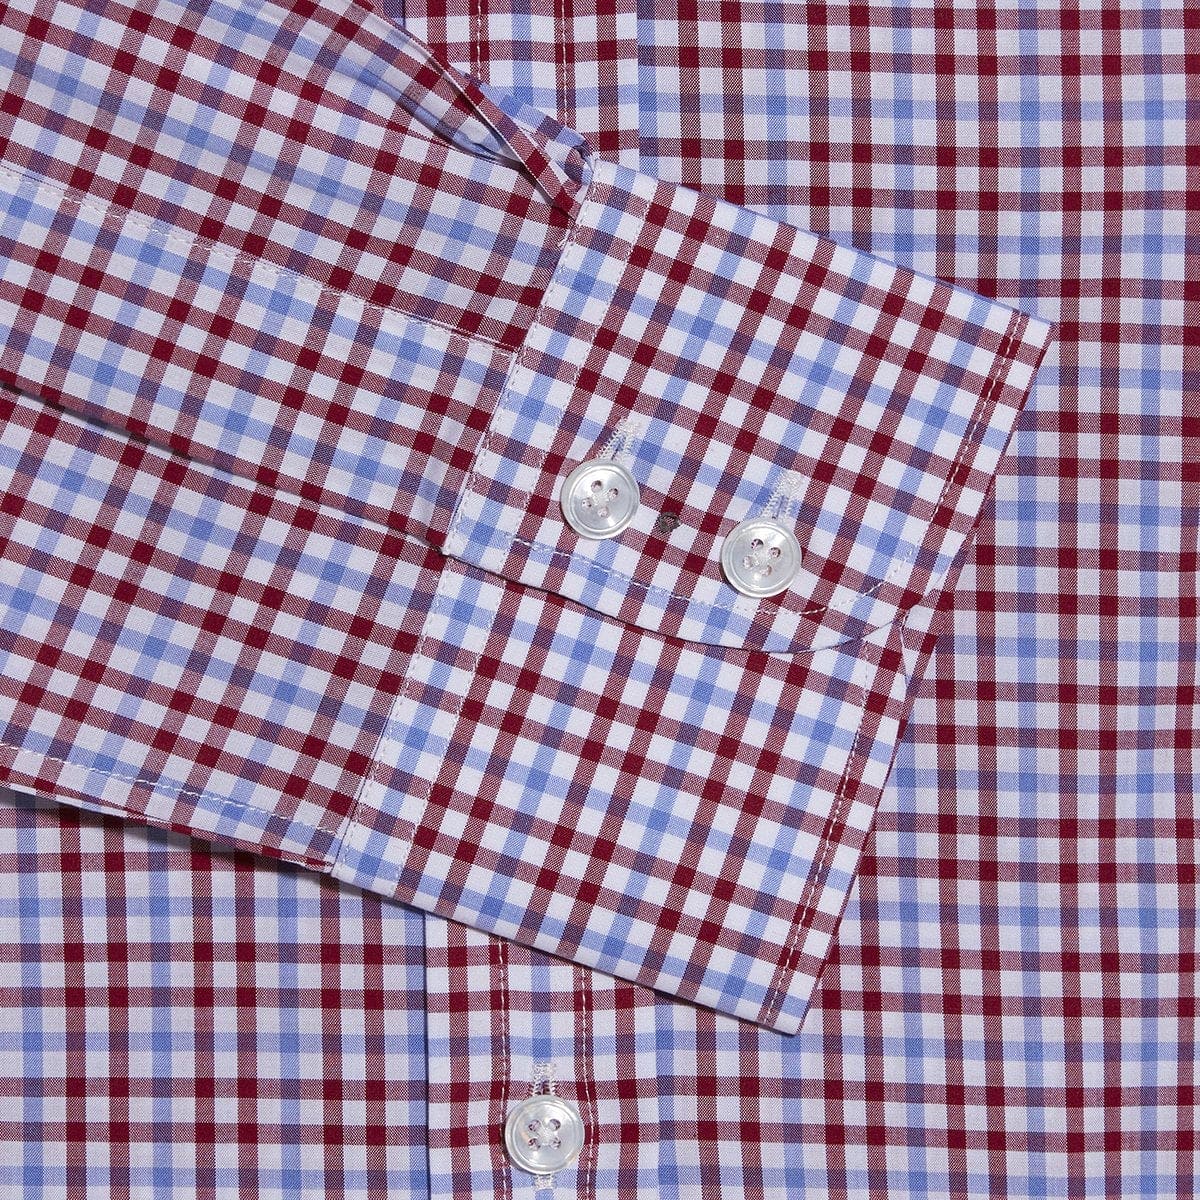 Contemporary Fit, Button Down Collar, Two Button Cuff Shirt In Blue & White With Red Overcheck